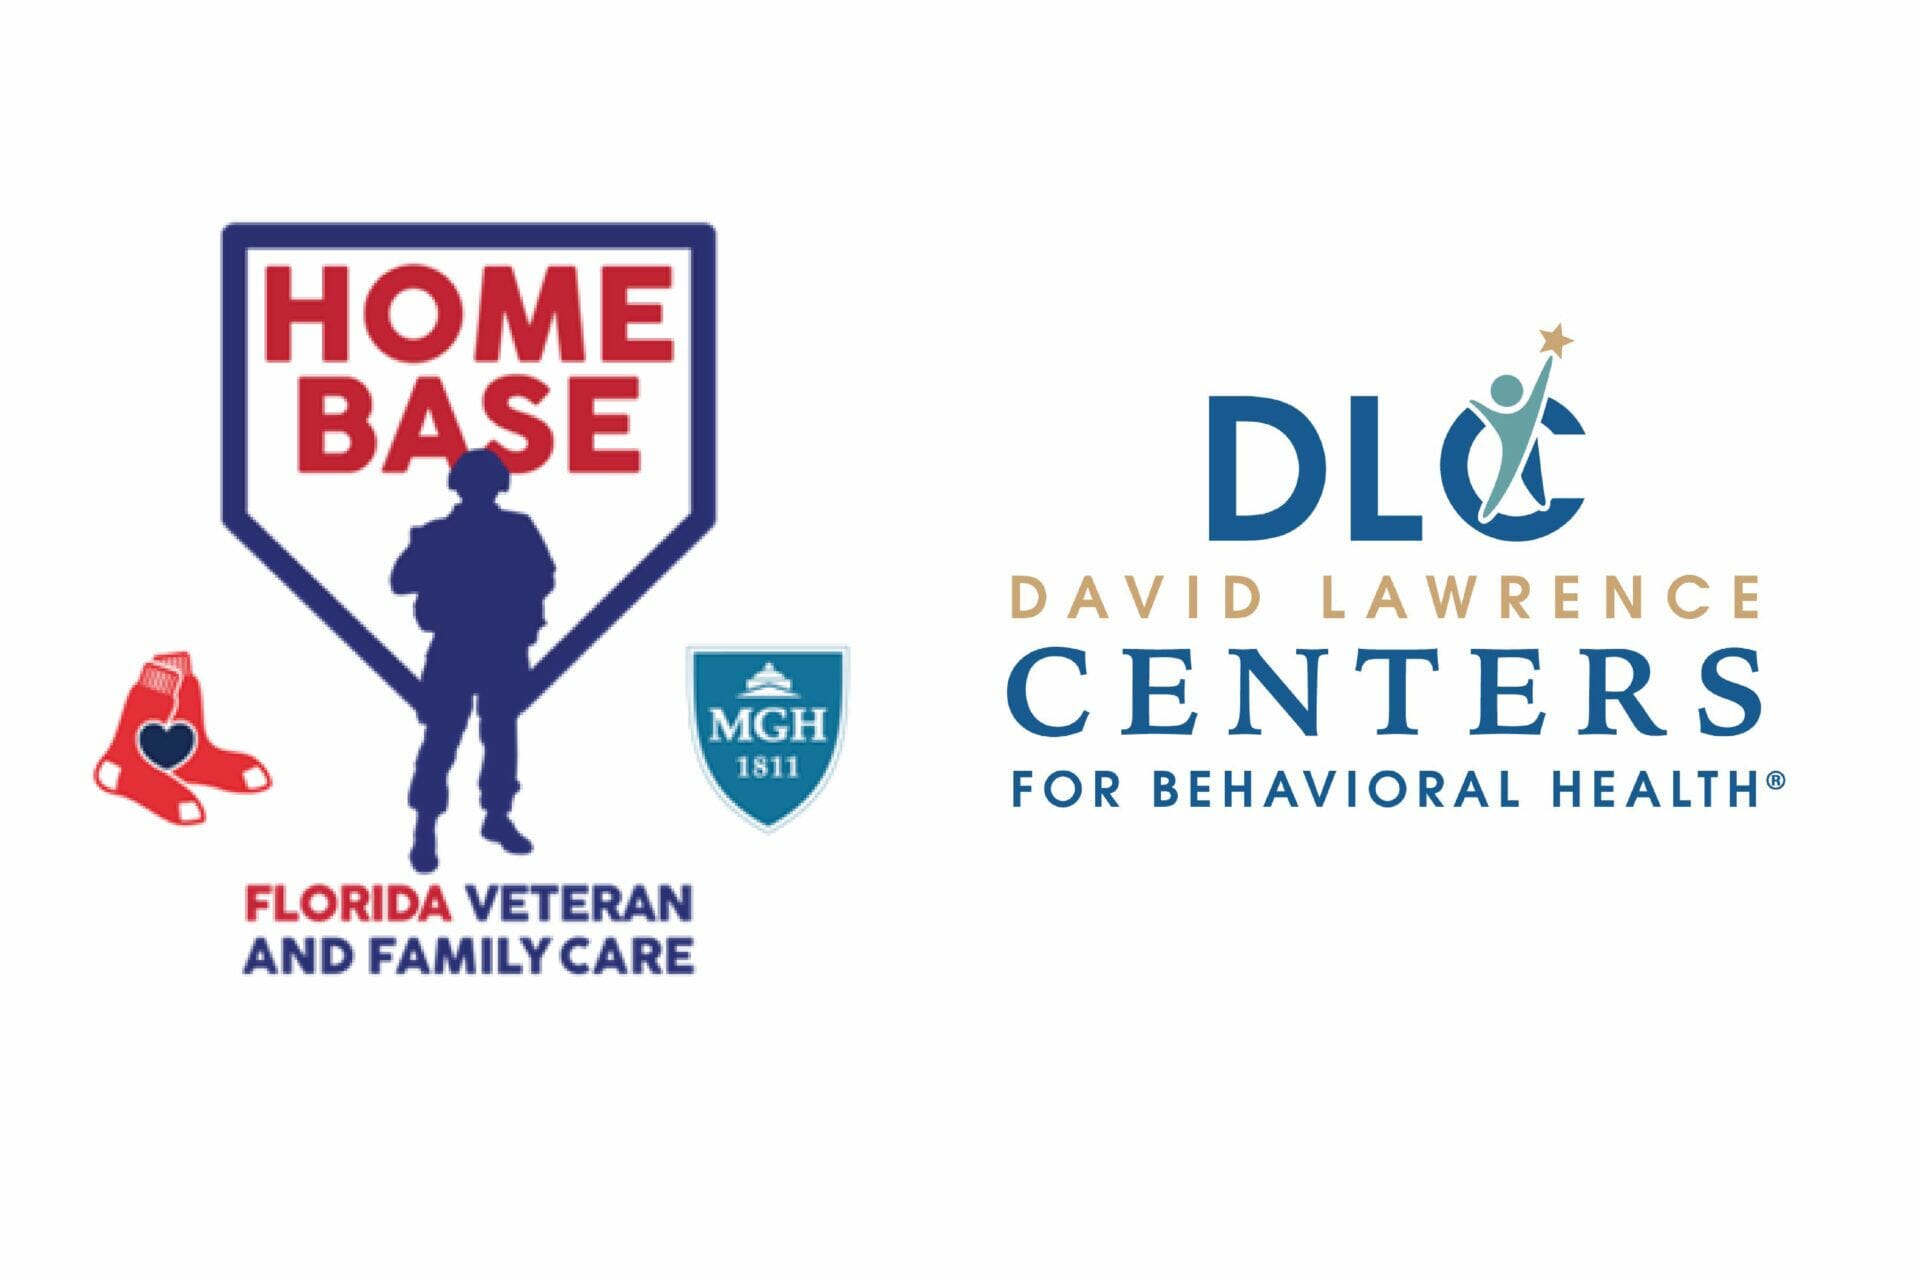 Home Base Florida & DLC Announce New Mental Health Services for Veterans and Families Impacted by the Invisible Wounds of War